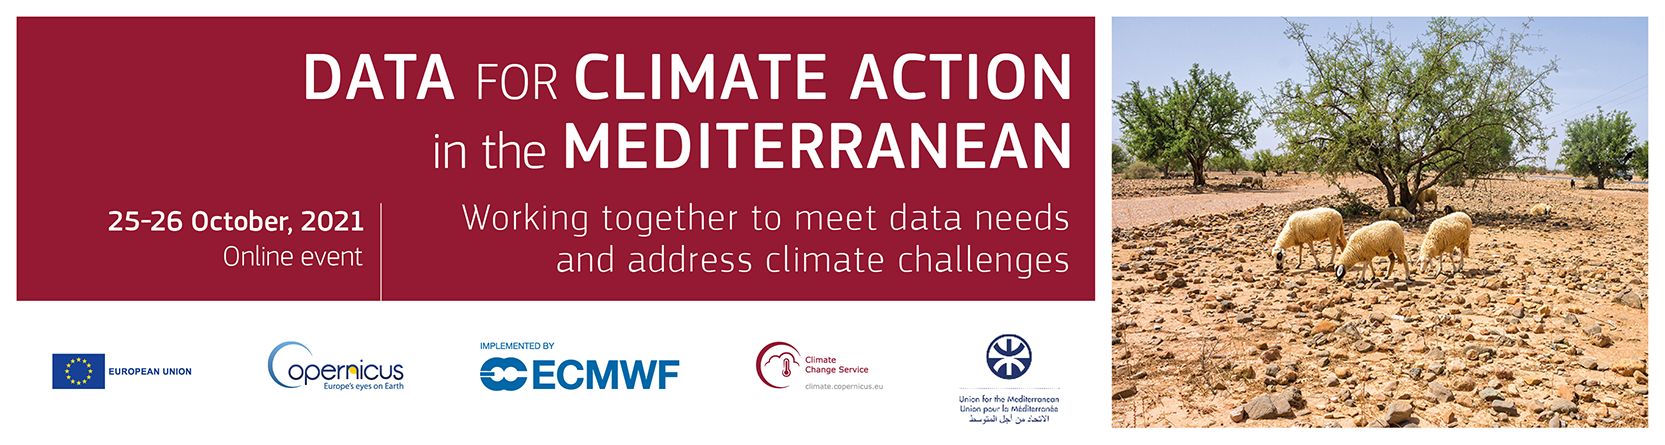 Data for climate action in the Mediterranean